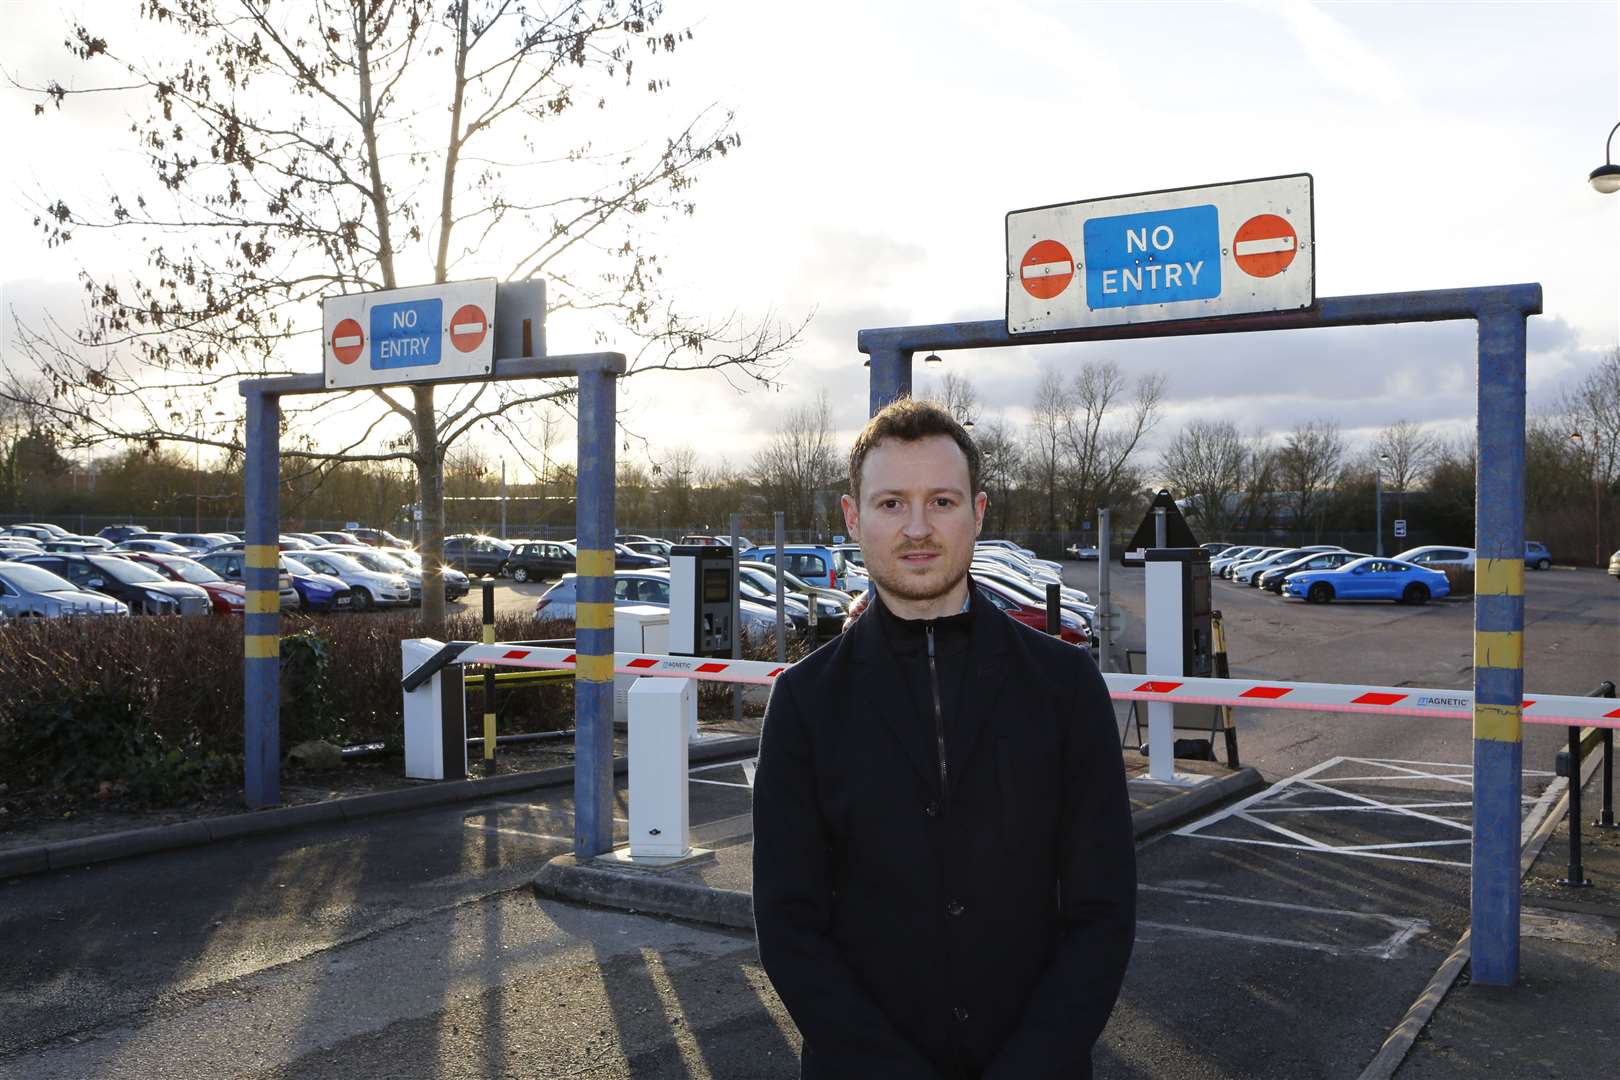 Council leader Ben Fitter-Harding can foresee major changes to the city's park and ride service